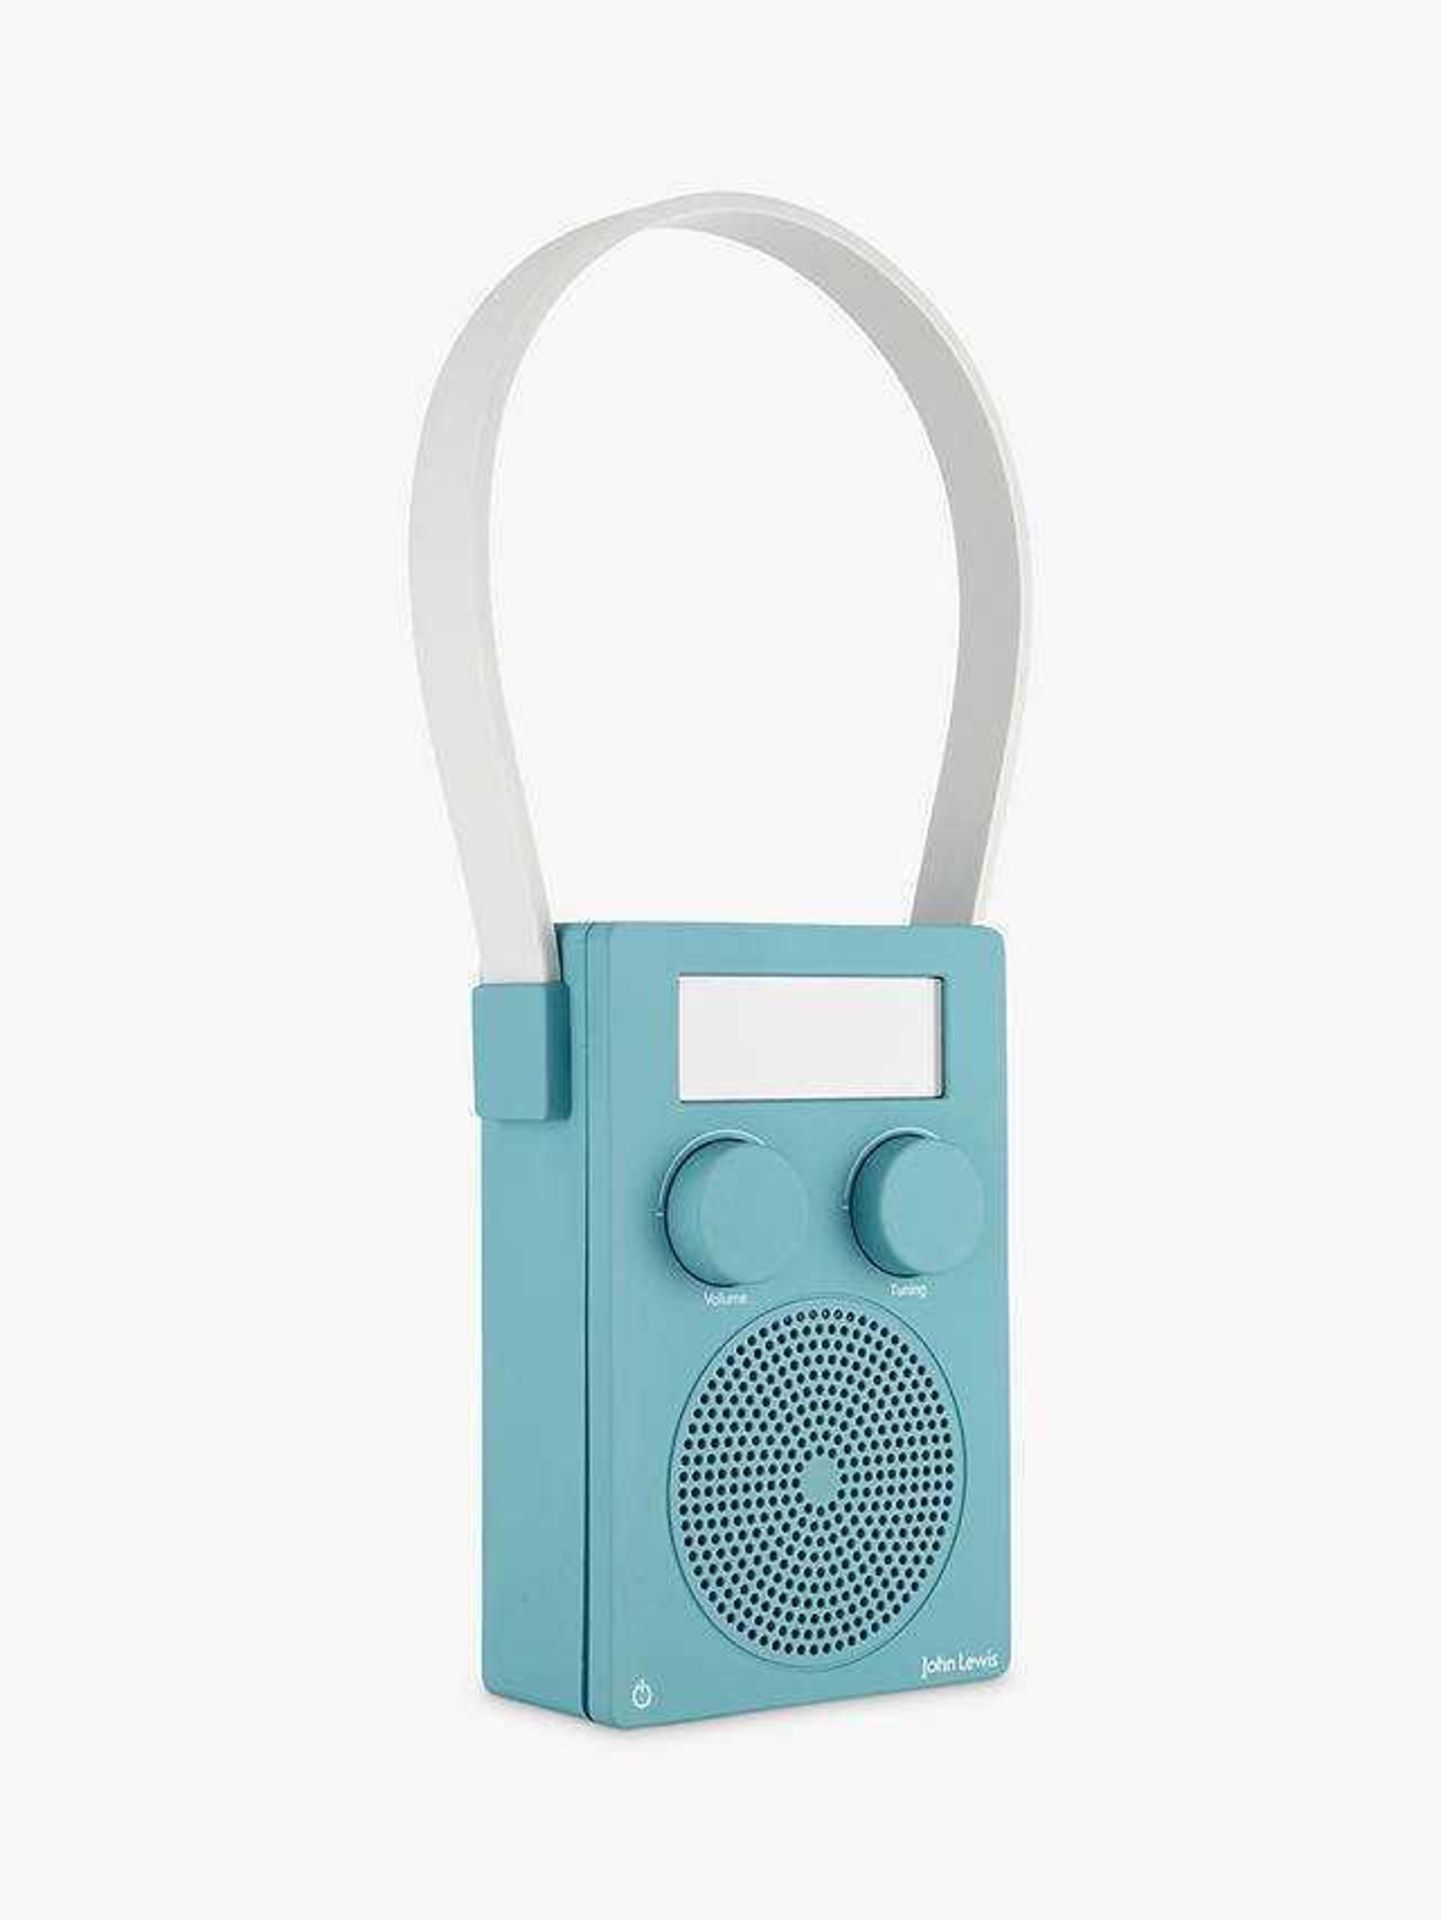 Rrp £50 Each Boxed John Lewis Spectrum Shower Dab And Fm Digital Radios - Image 6 of 6